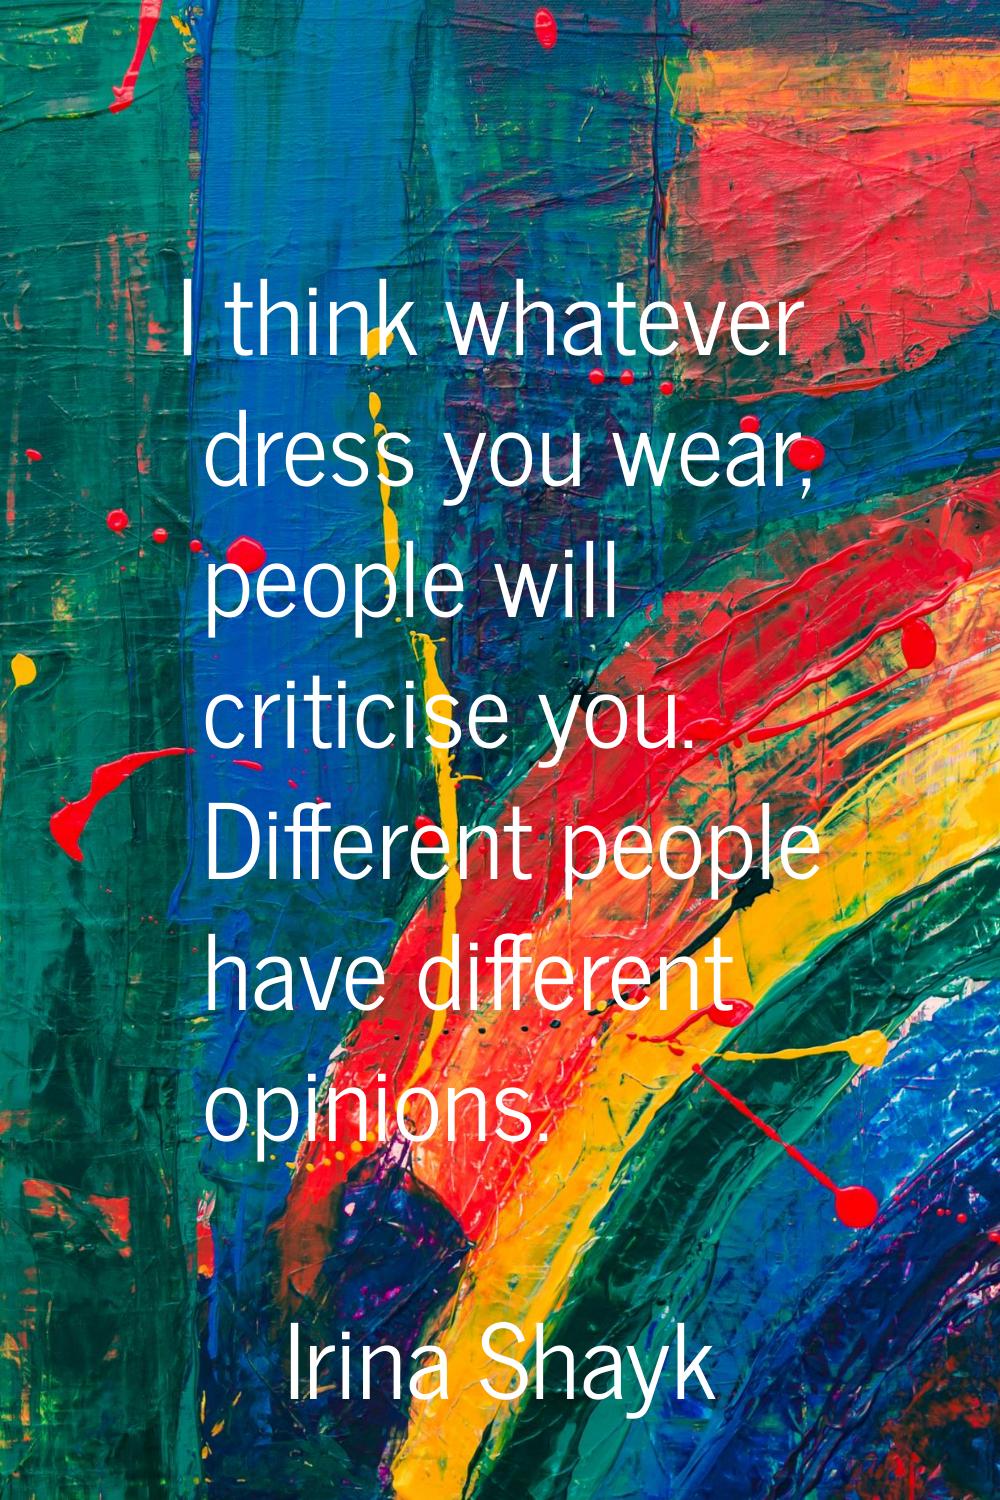 I think whatever dress you wear, people will criticise you. Different people have different opinion